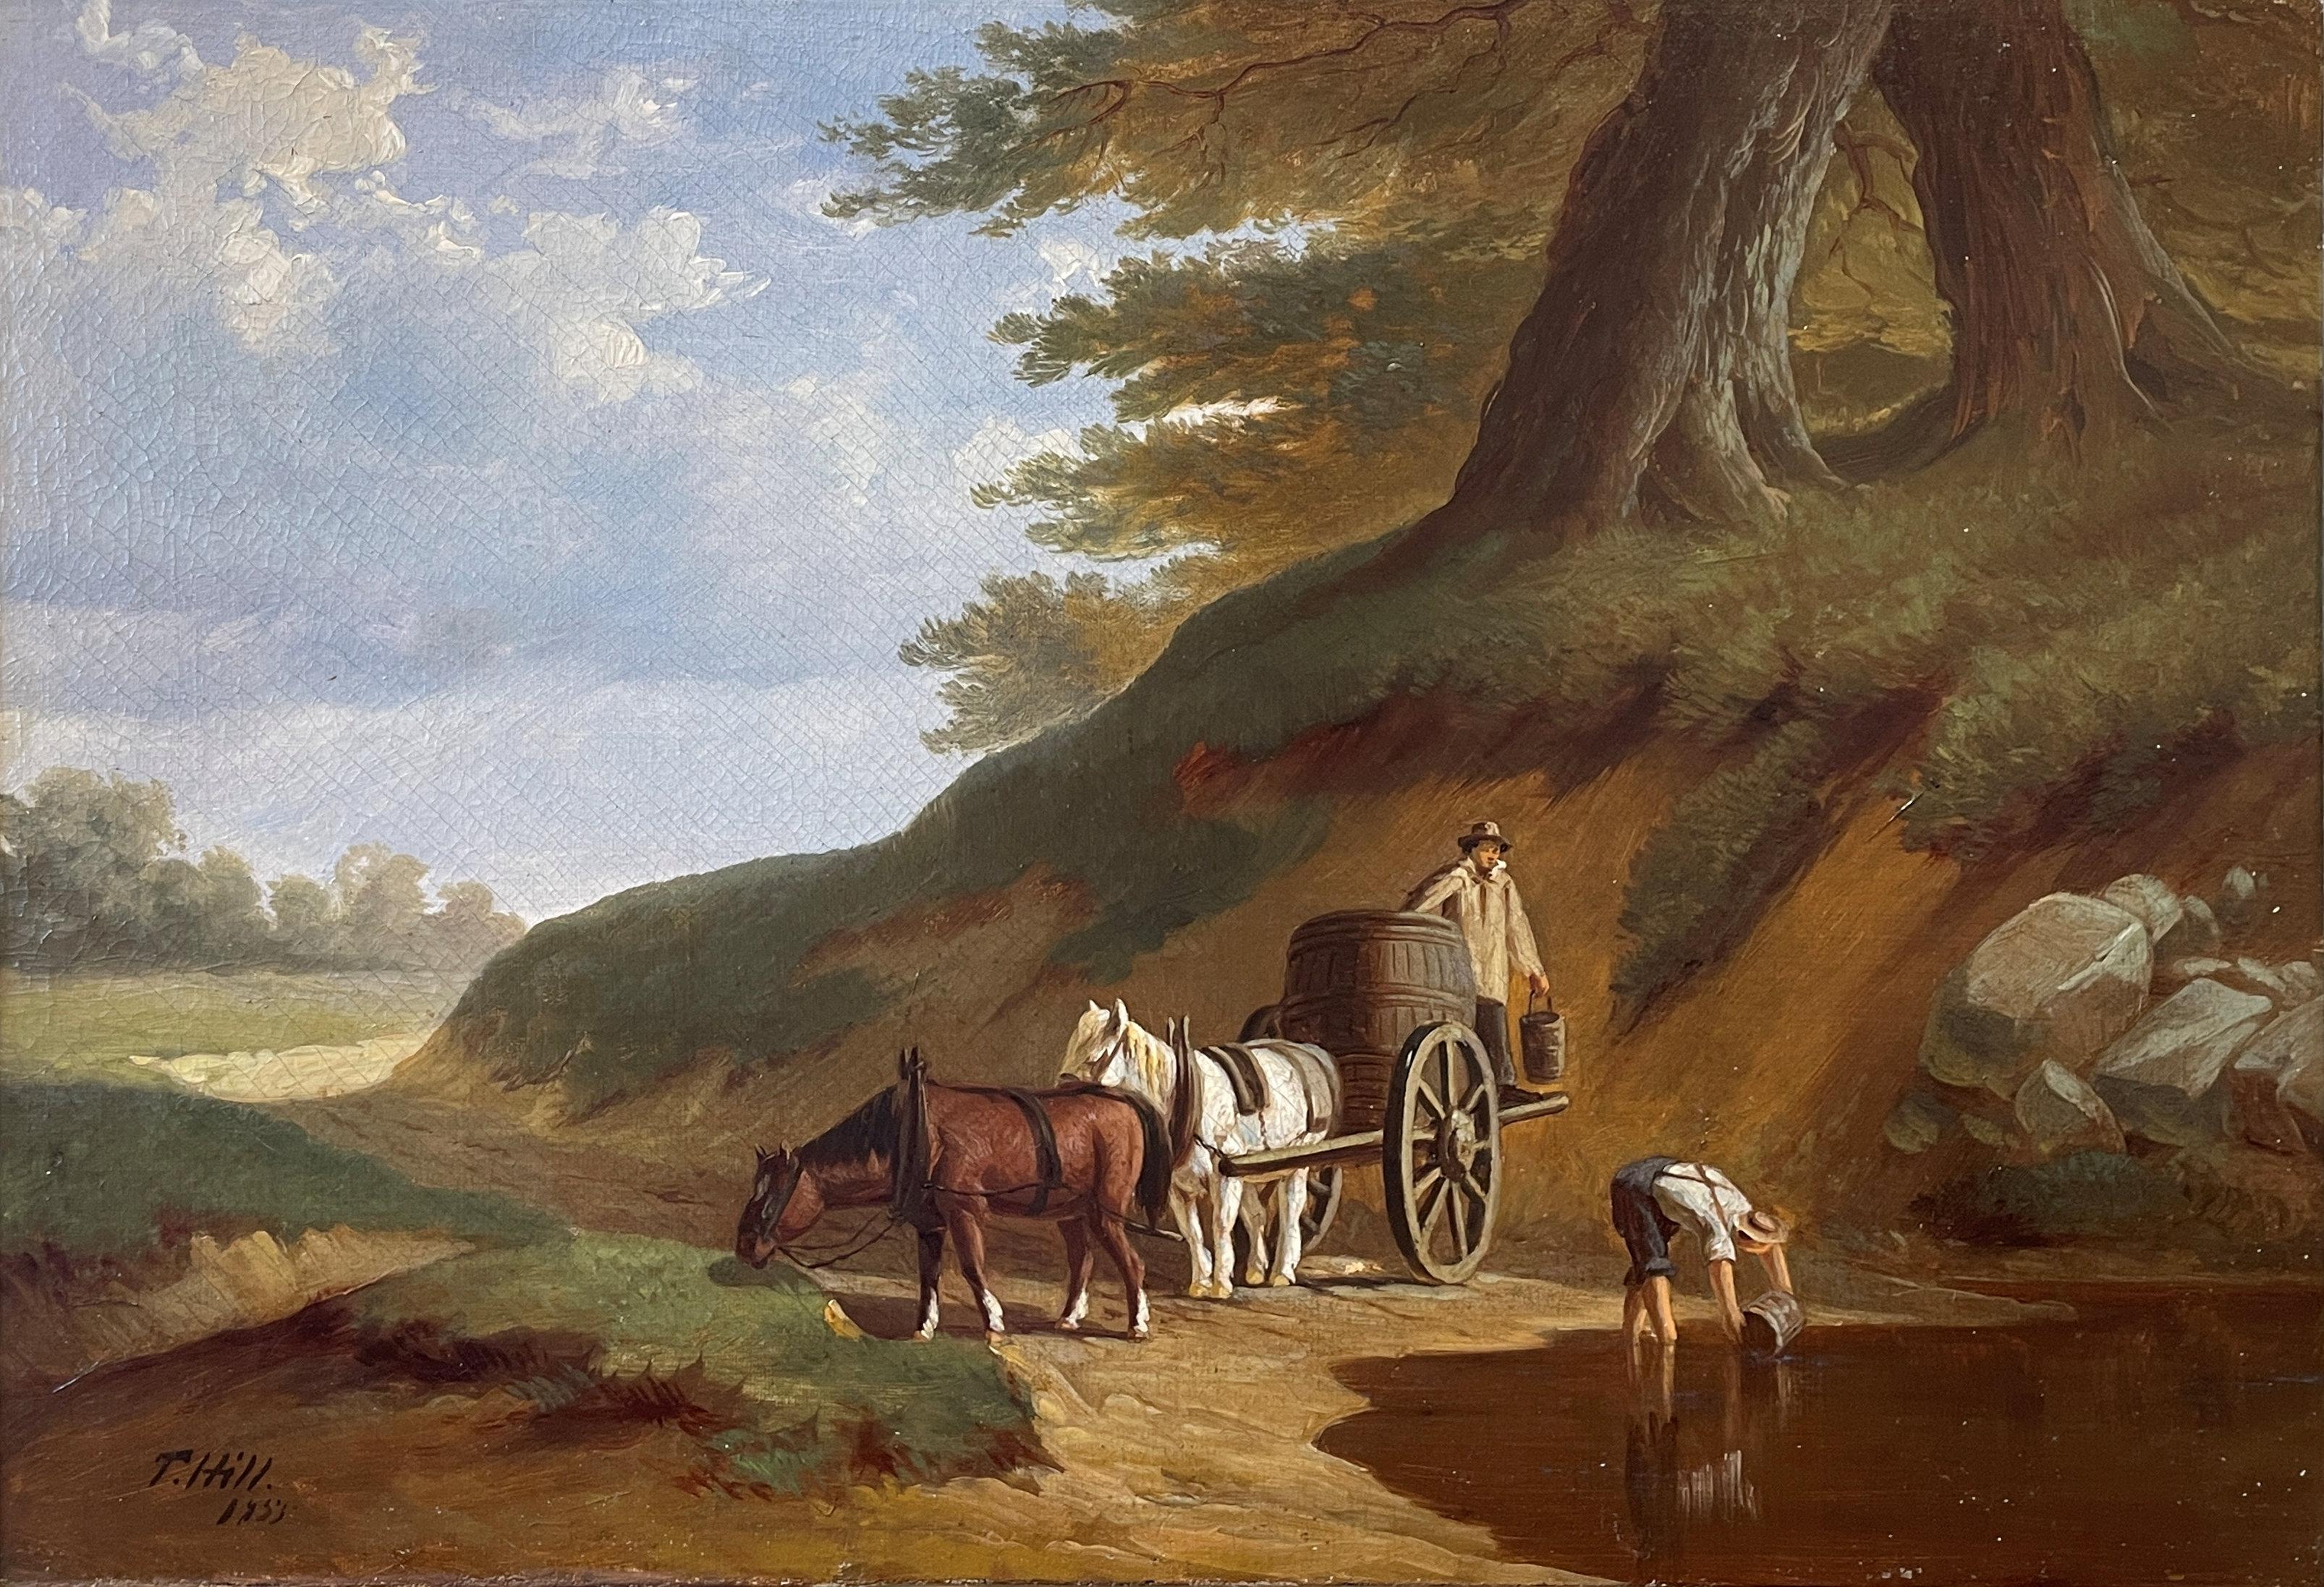 Thomas Hill
Water Stop, 1853
Signed and dated lower left
Oil on canvas
14 x 20 inches

Provenance:
Arader Galleries, New York

Immigrating from England in 1844, Thomas Hill came to America with his family as a youngster, and became one of America's